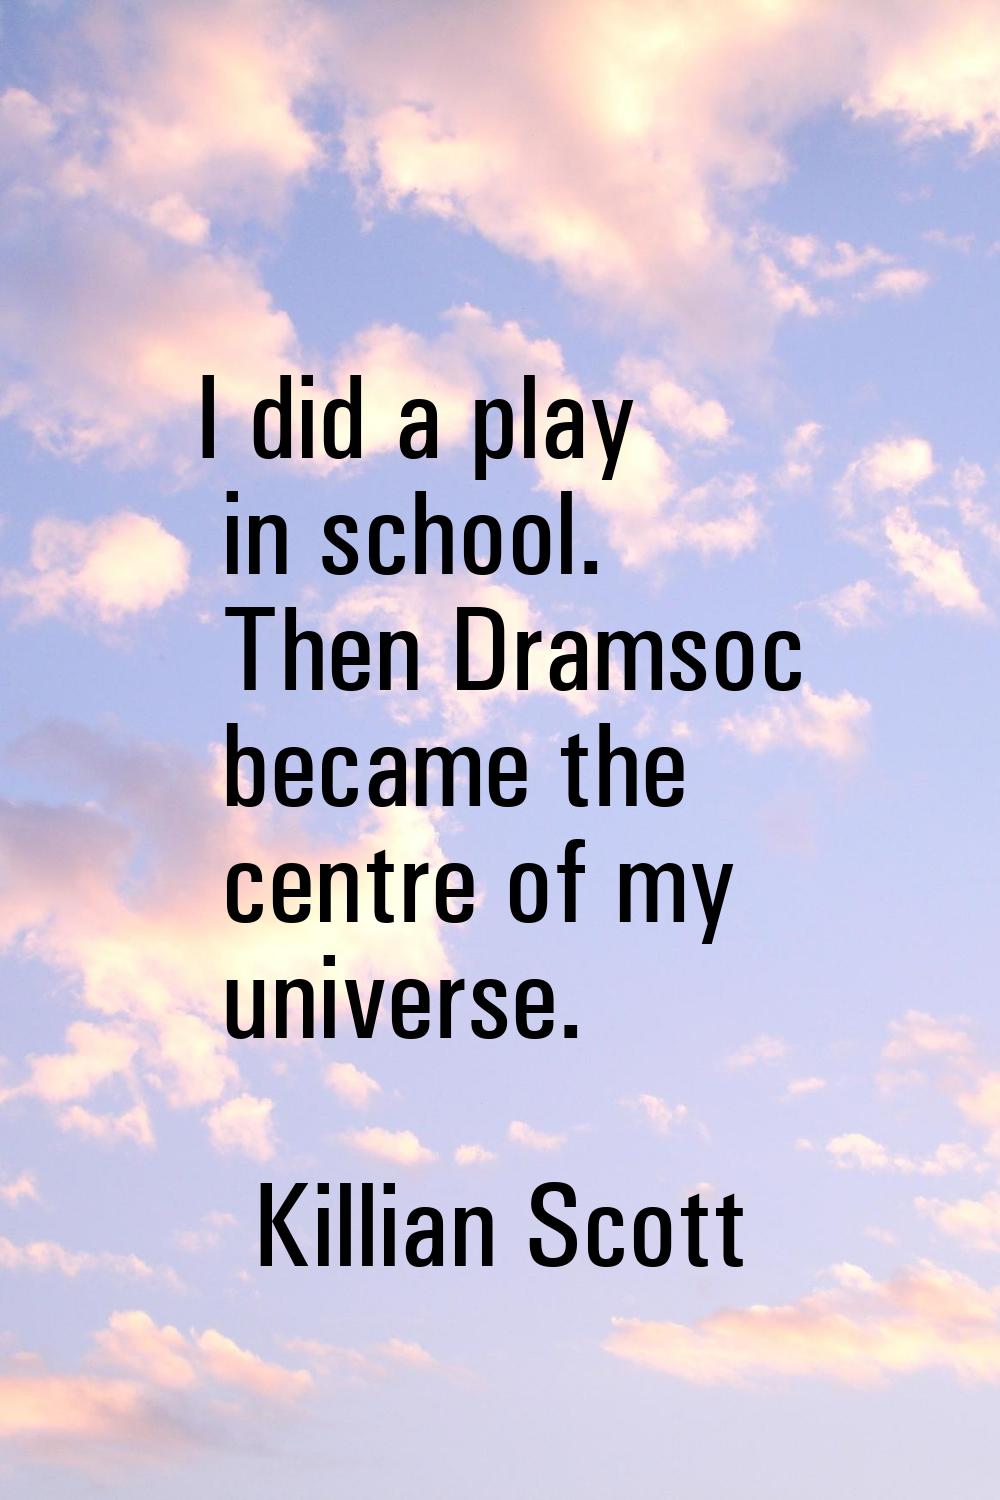 I did a play in school. Then Dramsoc became the centre of my universe.